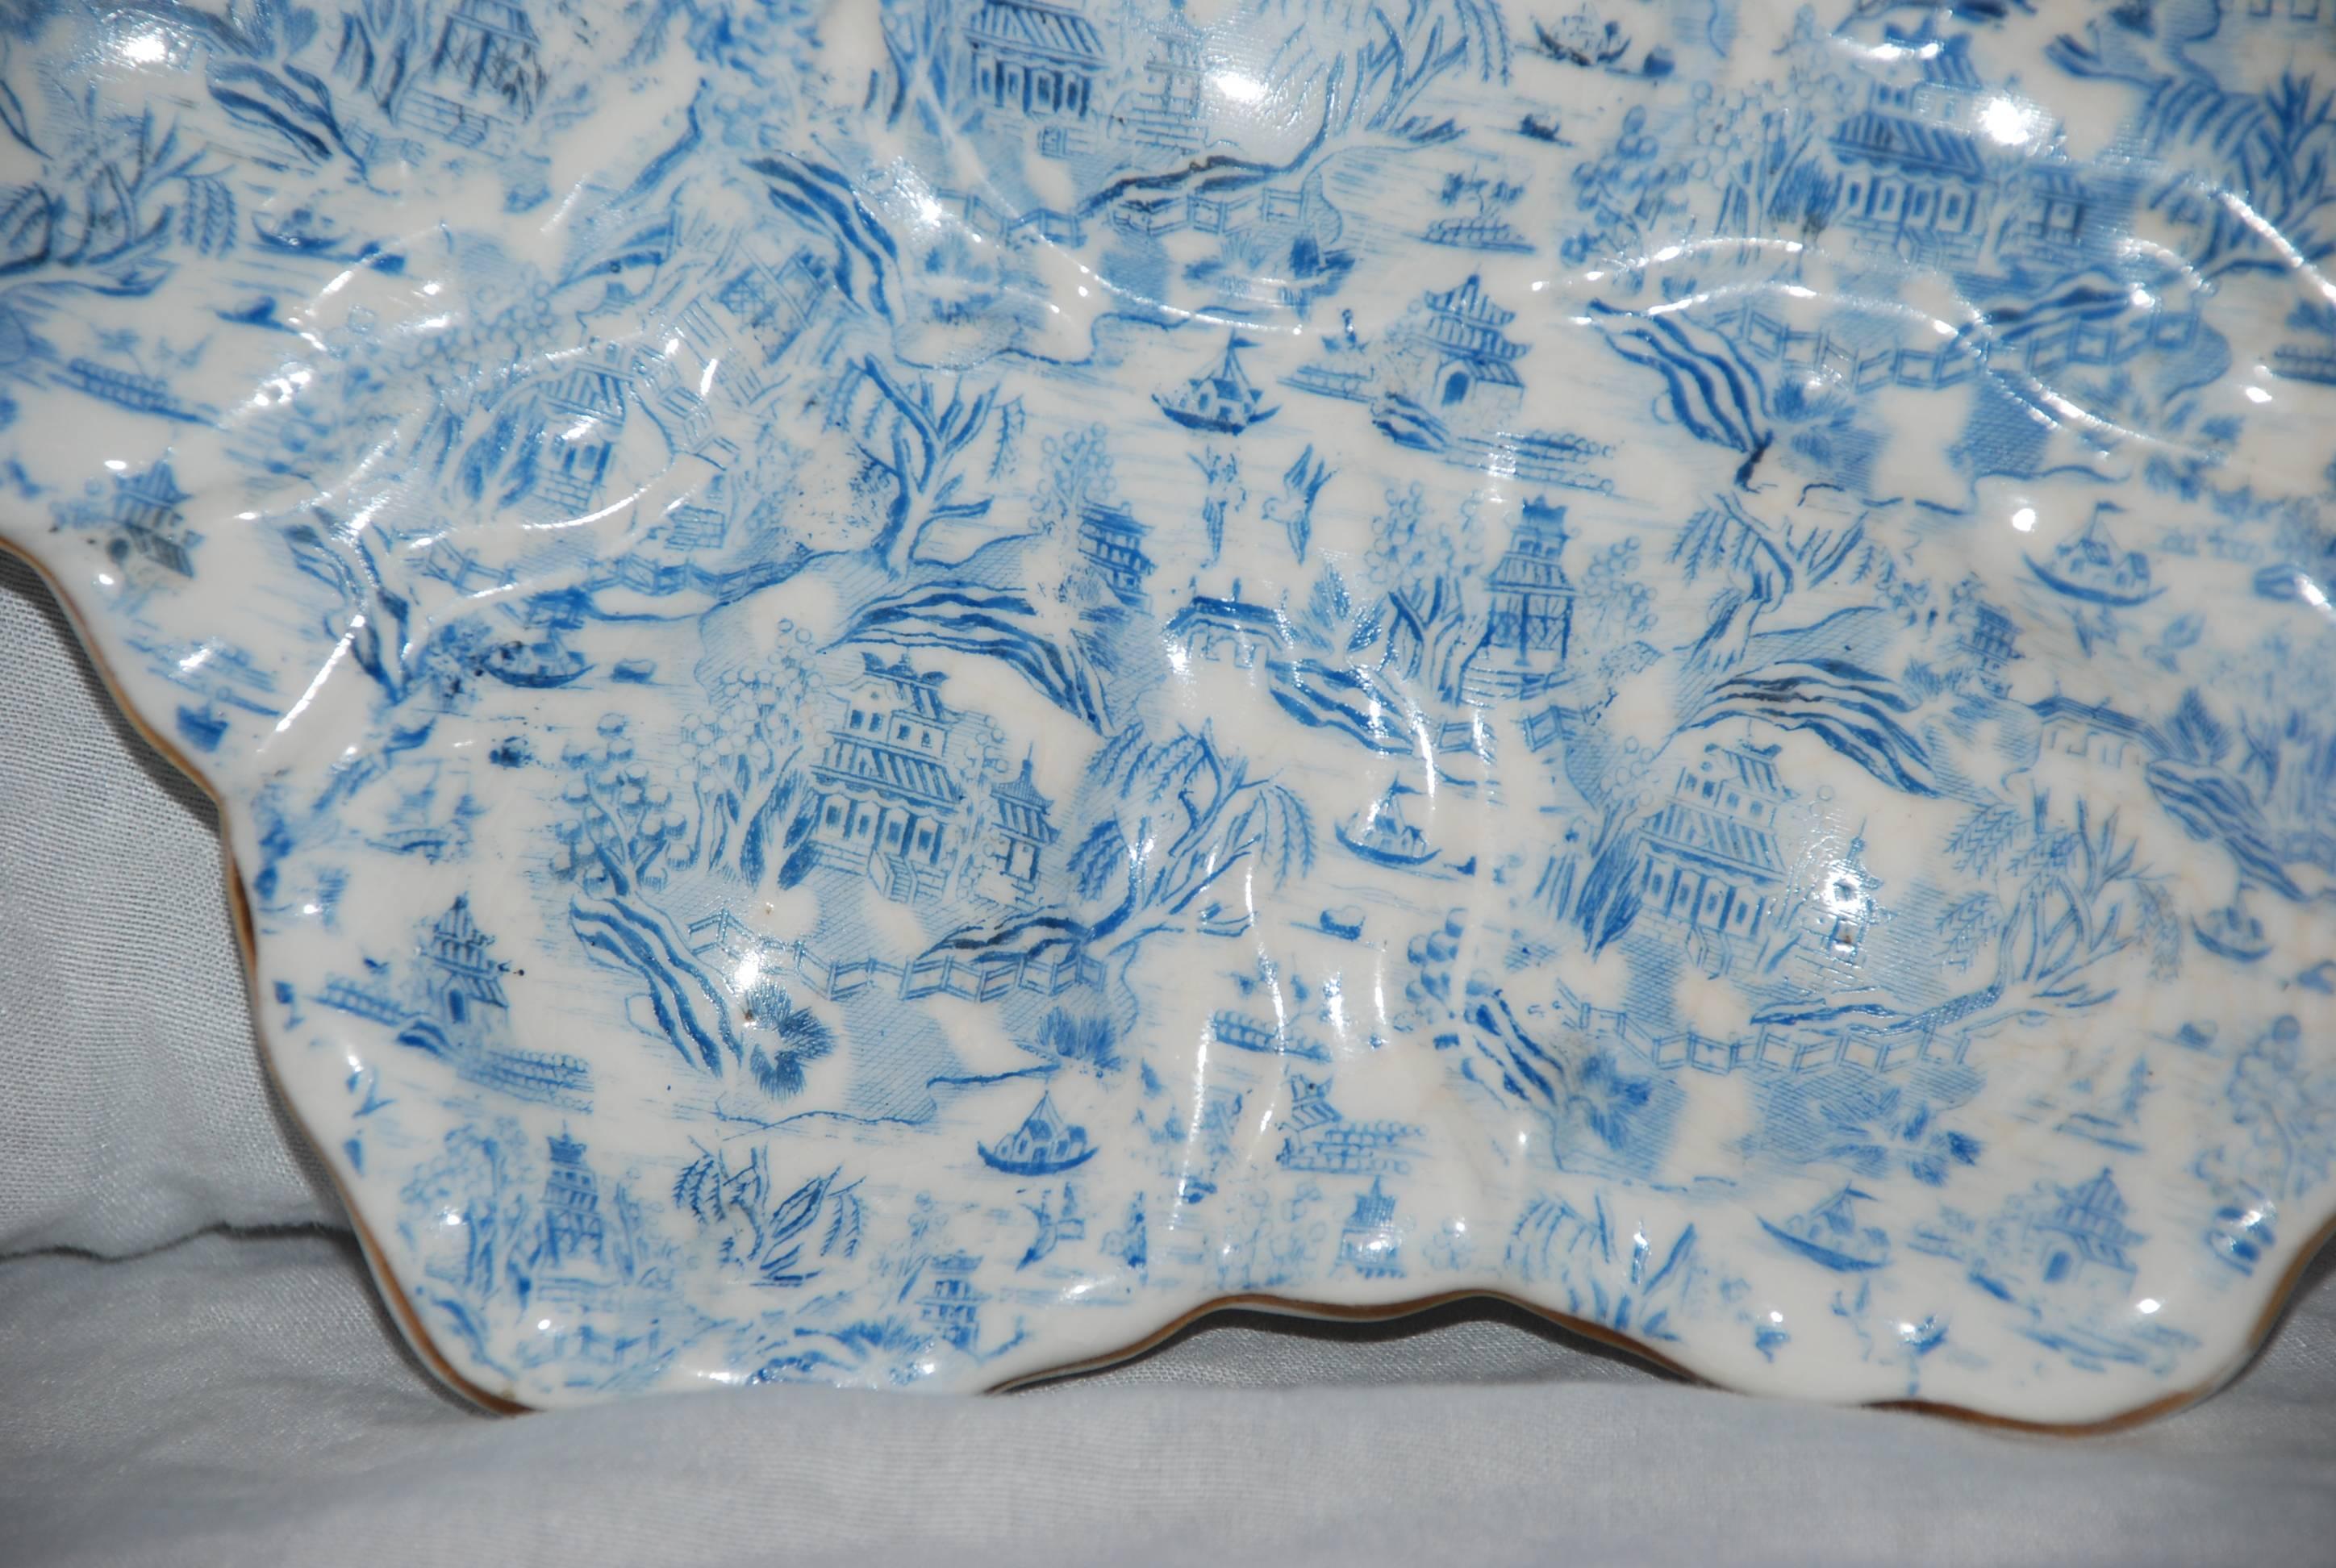 Antique hand-painted porcelain oyster plate.